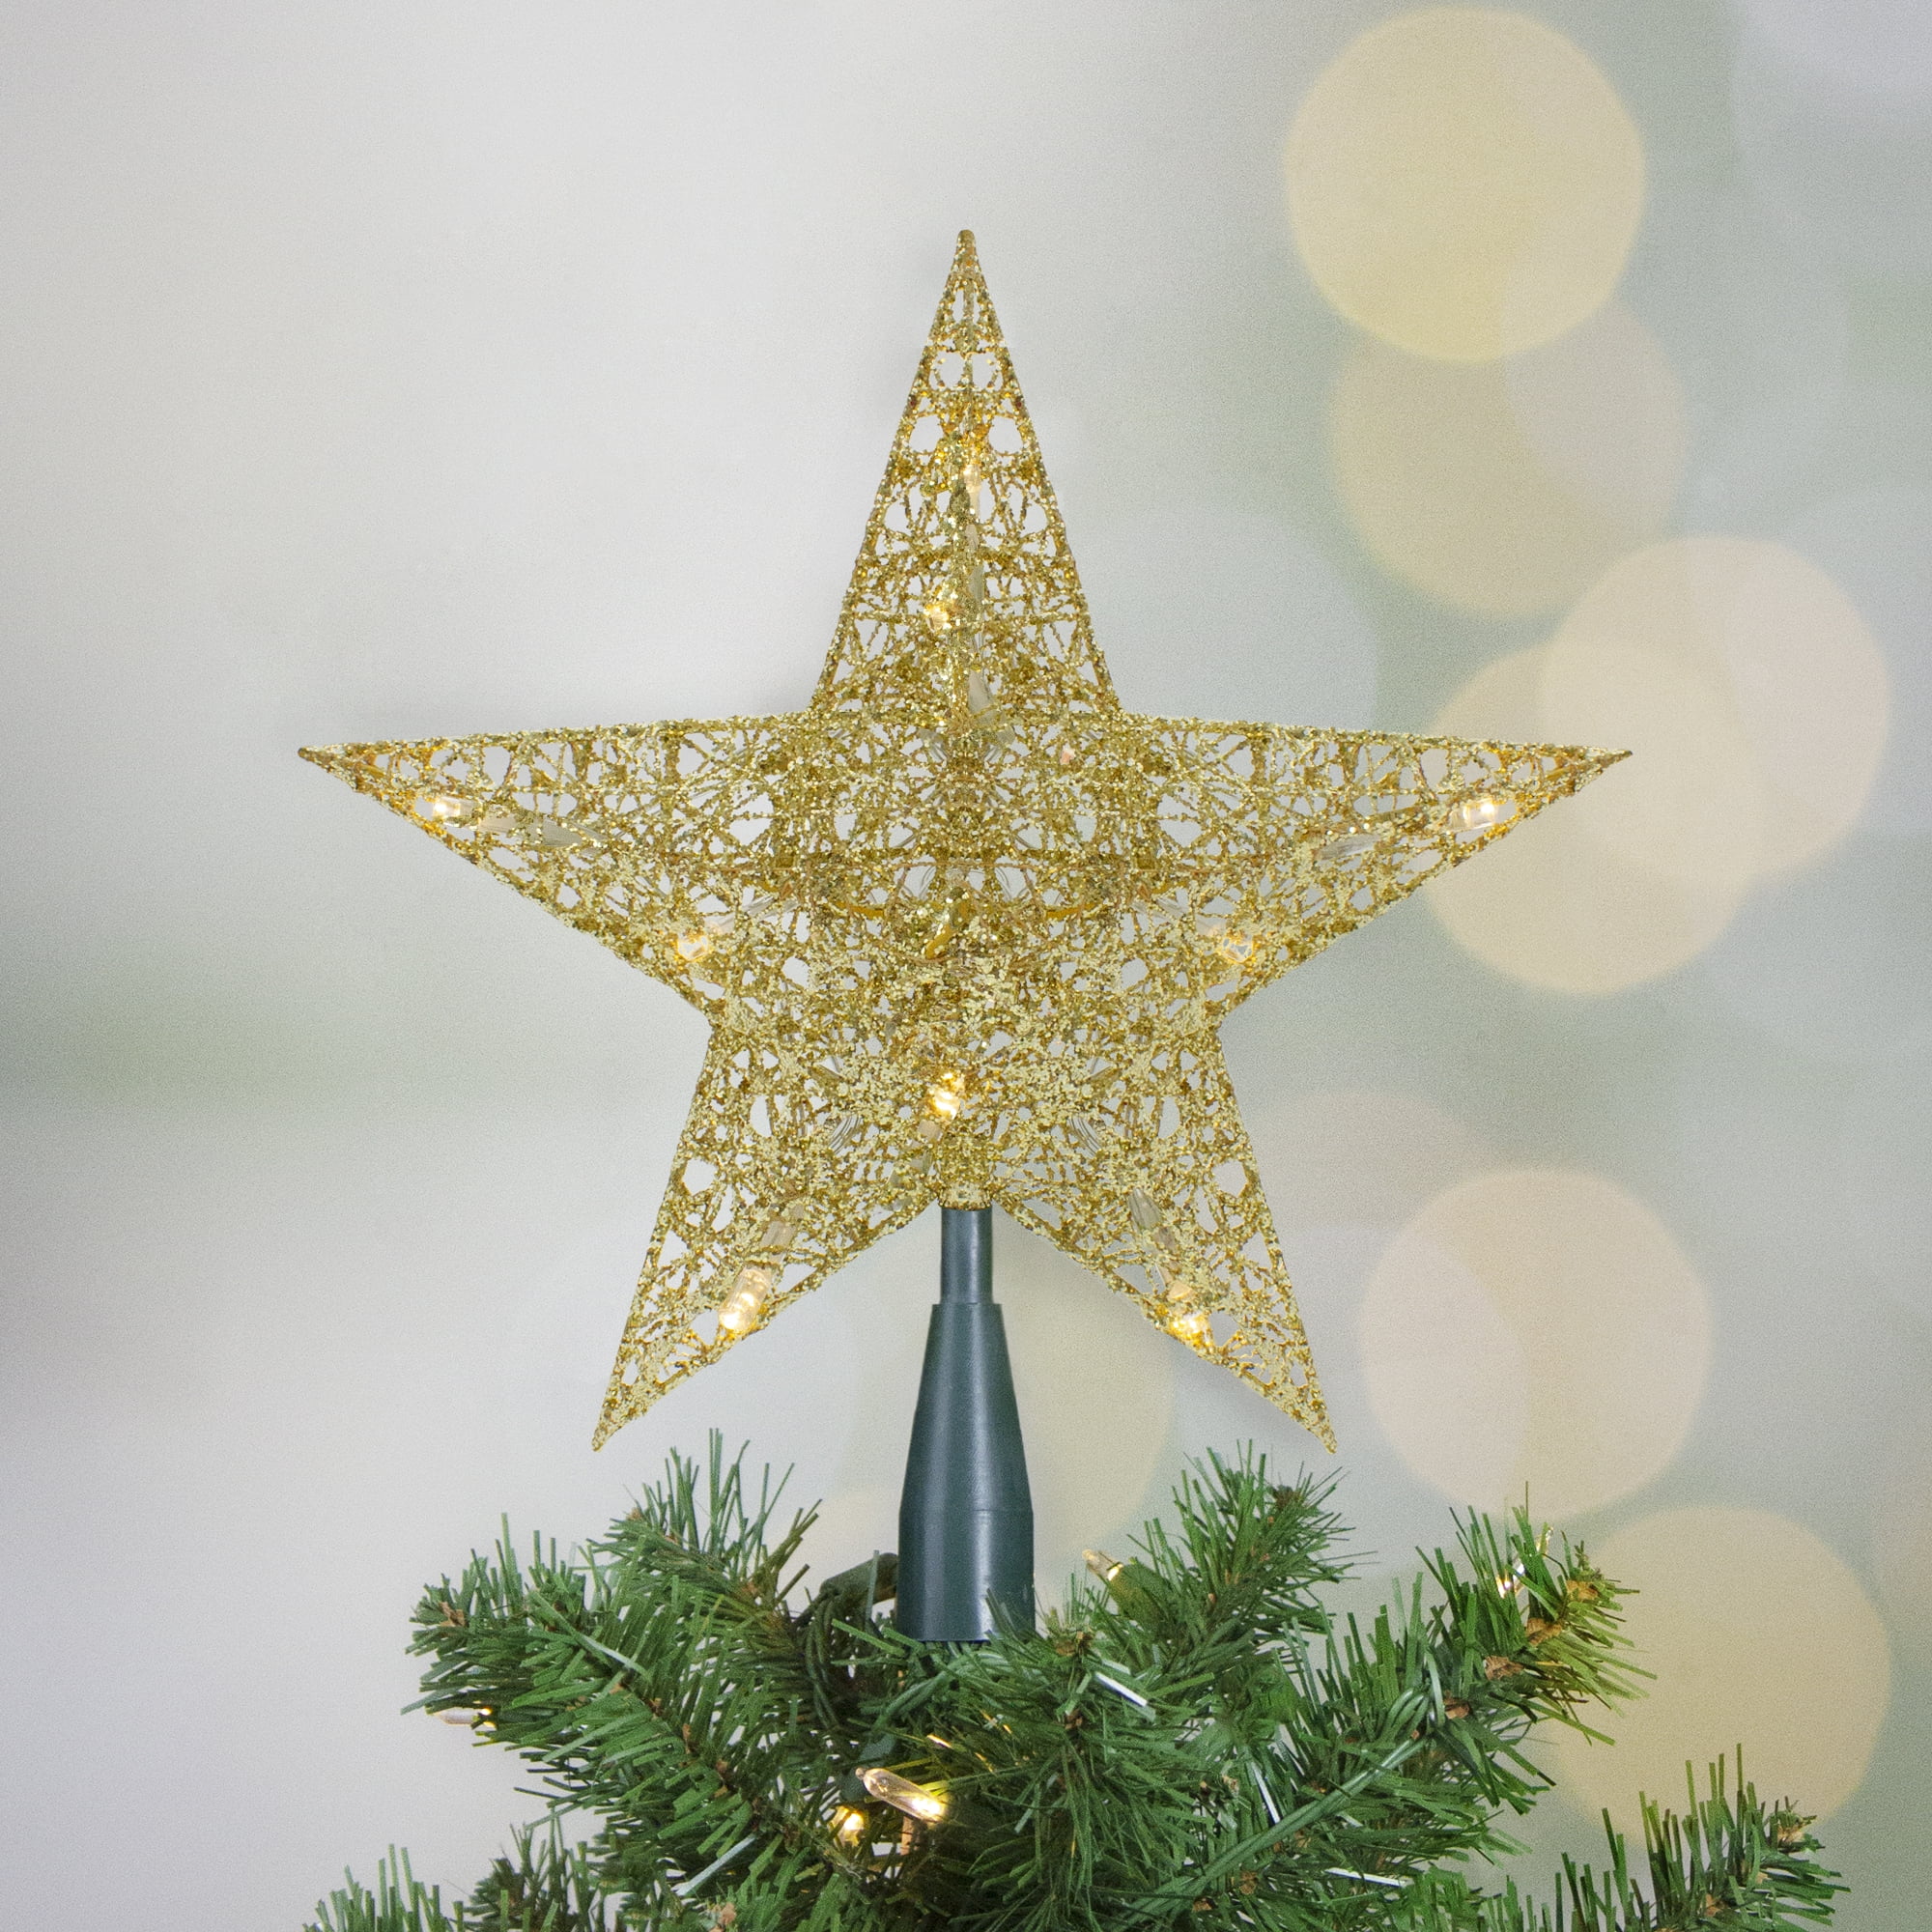 Christmas Tree Top Star with Warm LED Lights 10 Inch Glittered Christmas Star Tree Toppers Christmas Tree Decorations Xmas Tree-top Star Decoration for Rustic Farmhouse Holiday Ornaments Blue 